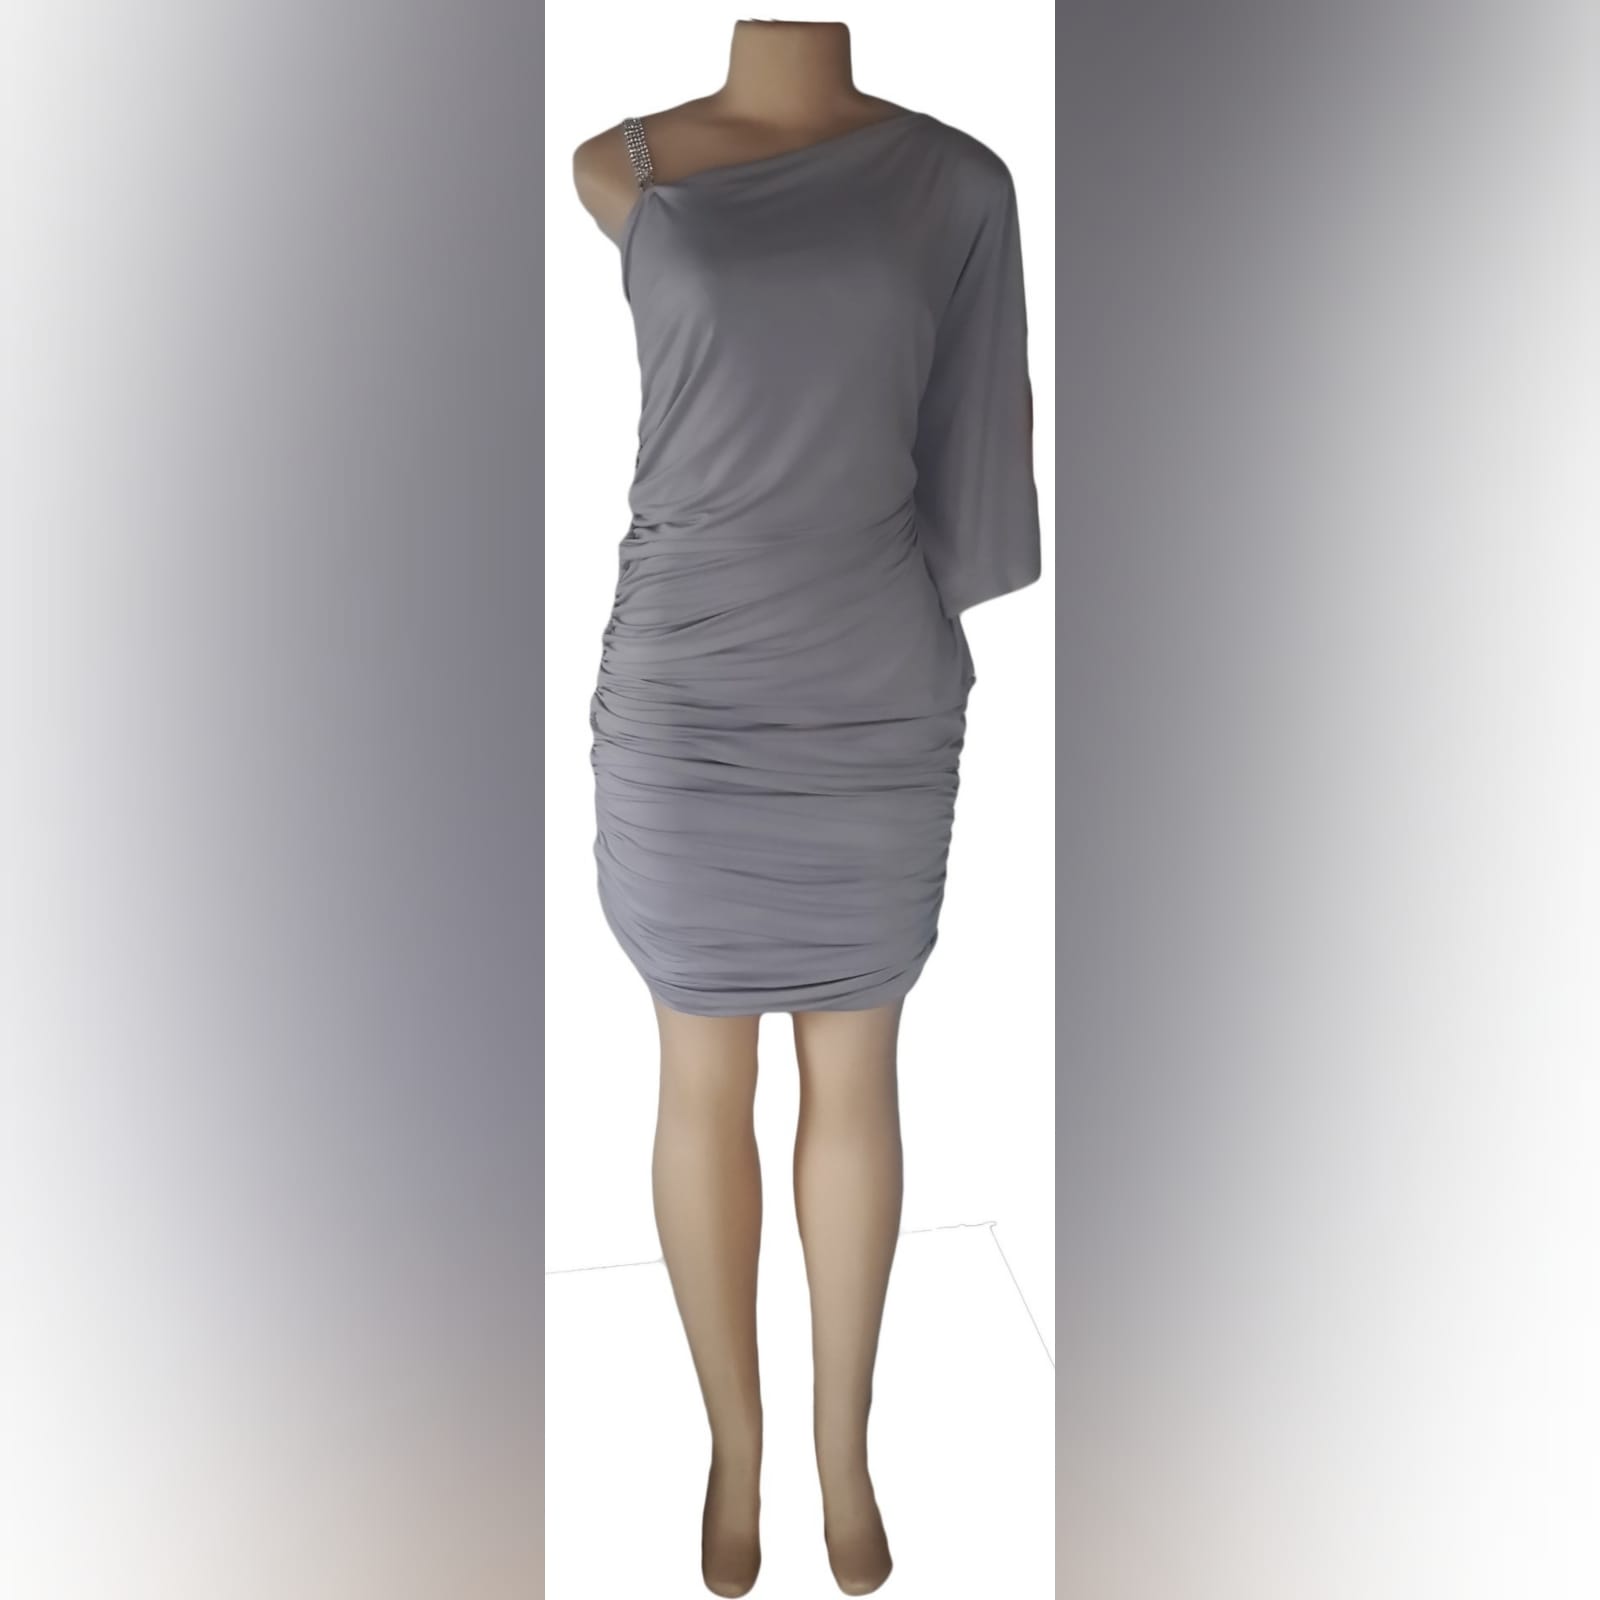 Light grey ruched knee length smart casual dress 1 light grey ruched knee length smart casual dress with one wide sleeve, an angular neckline and a removable diamante shoulder strap.